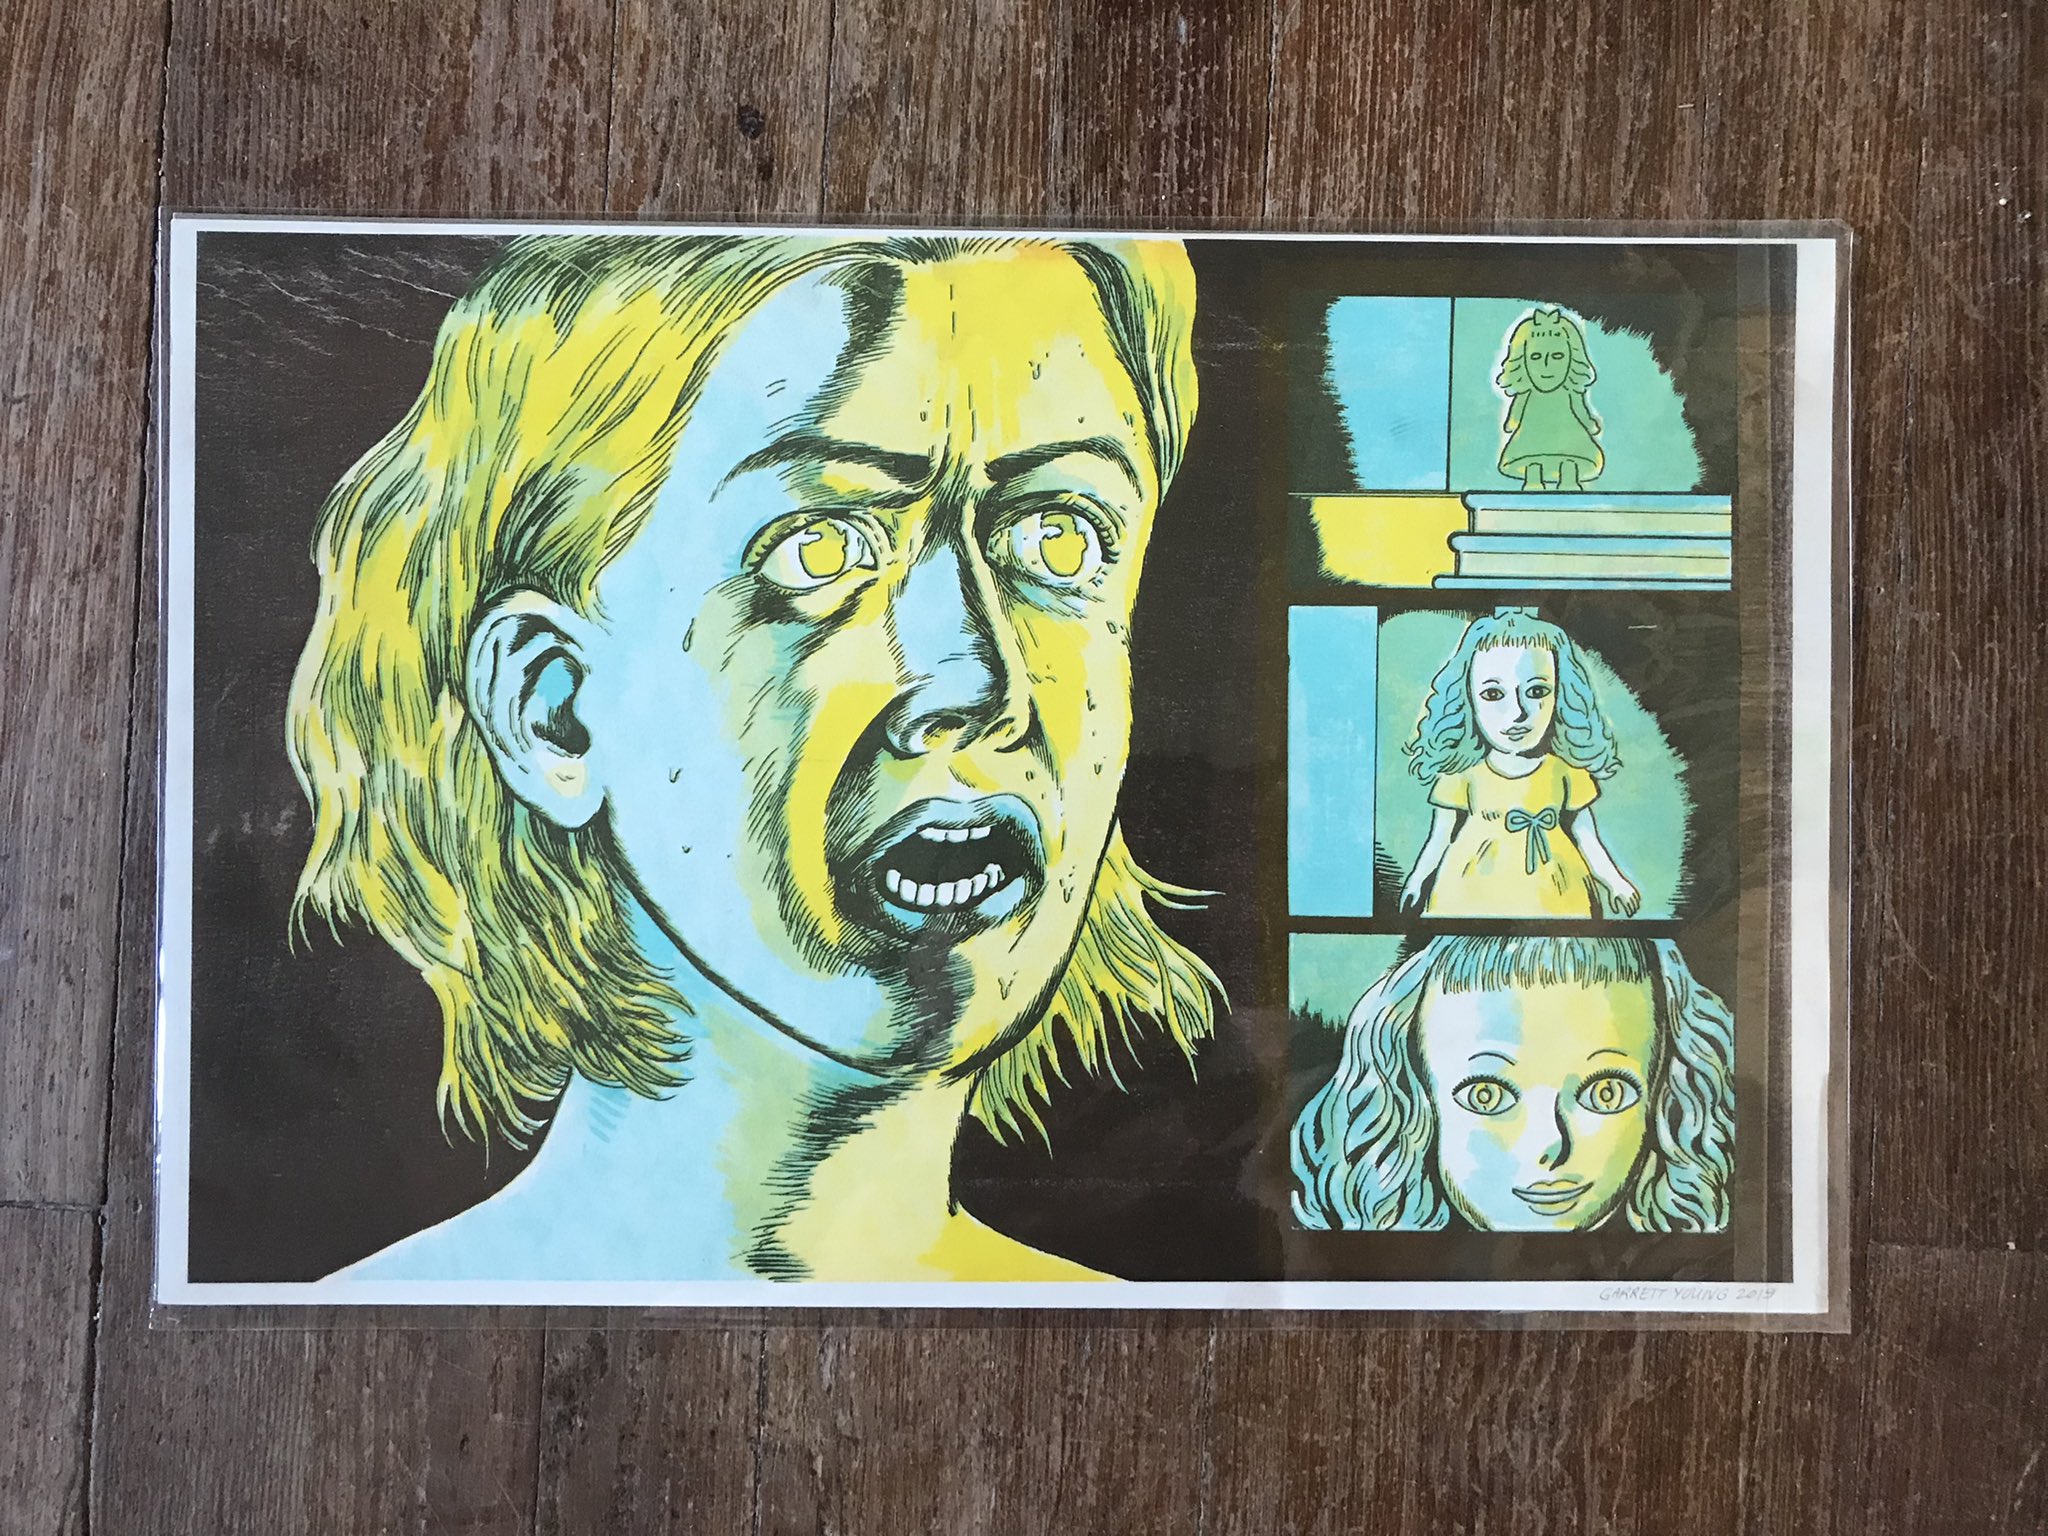 blue and yellow riso print of an illustration of what appears to be a woman screaming in horror at the sight of what appears to be a haunted doll or something  